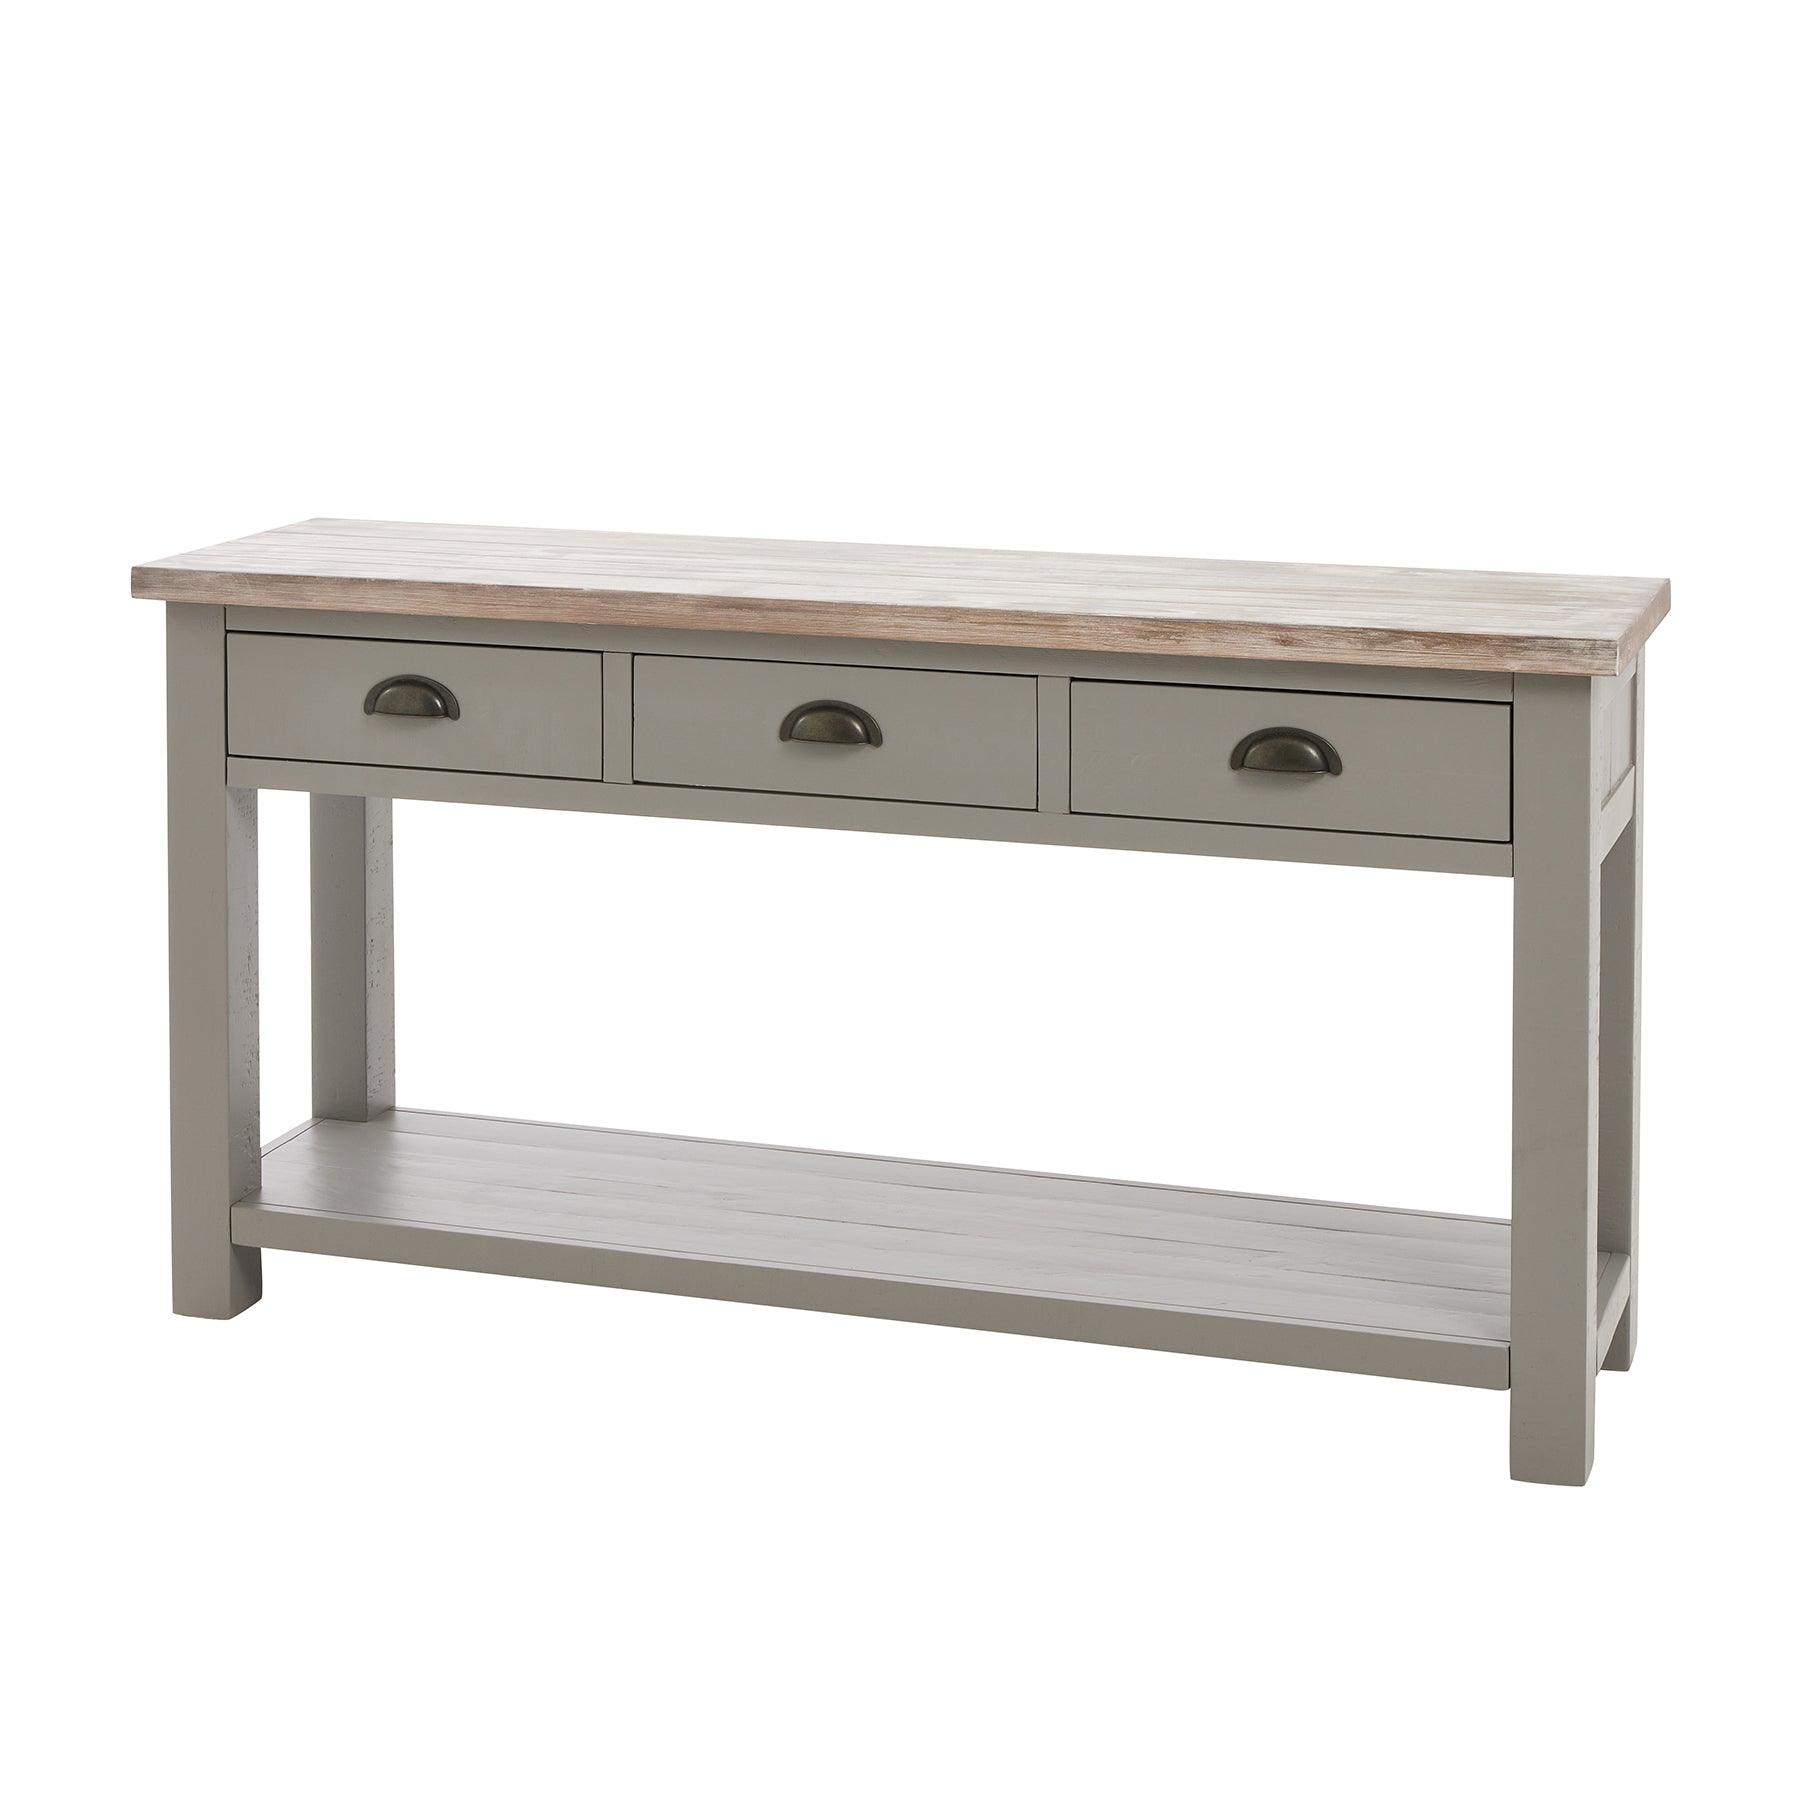 View The Oxley Collection Three Drawer Console Table information